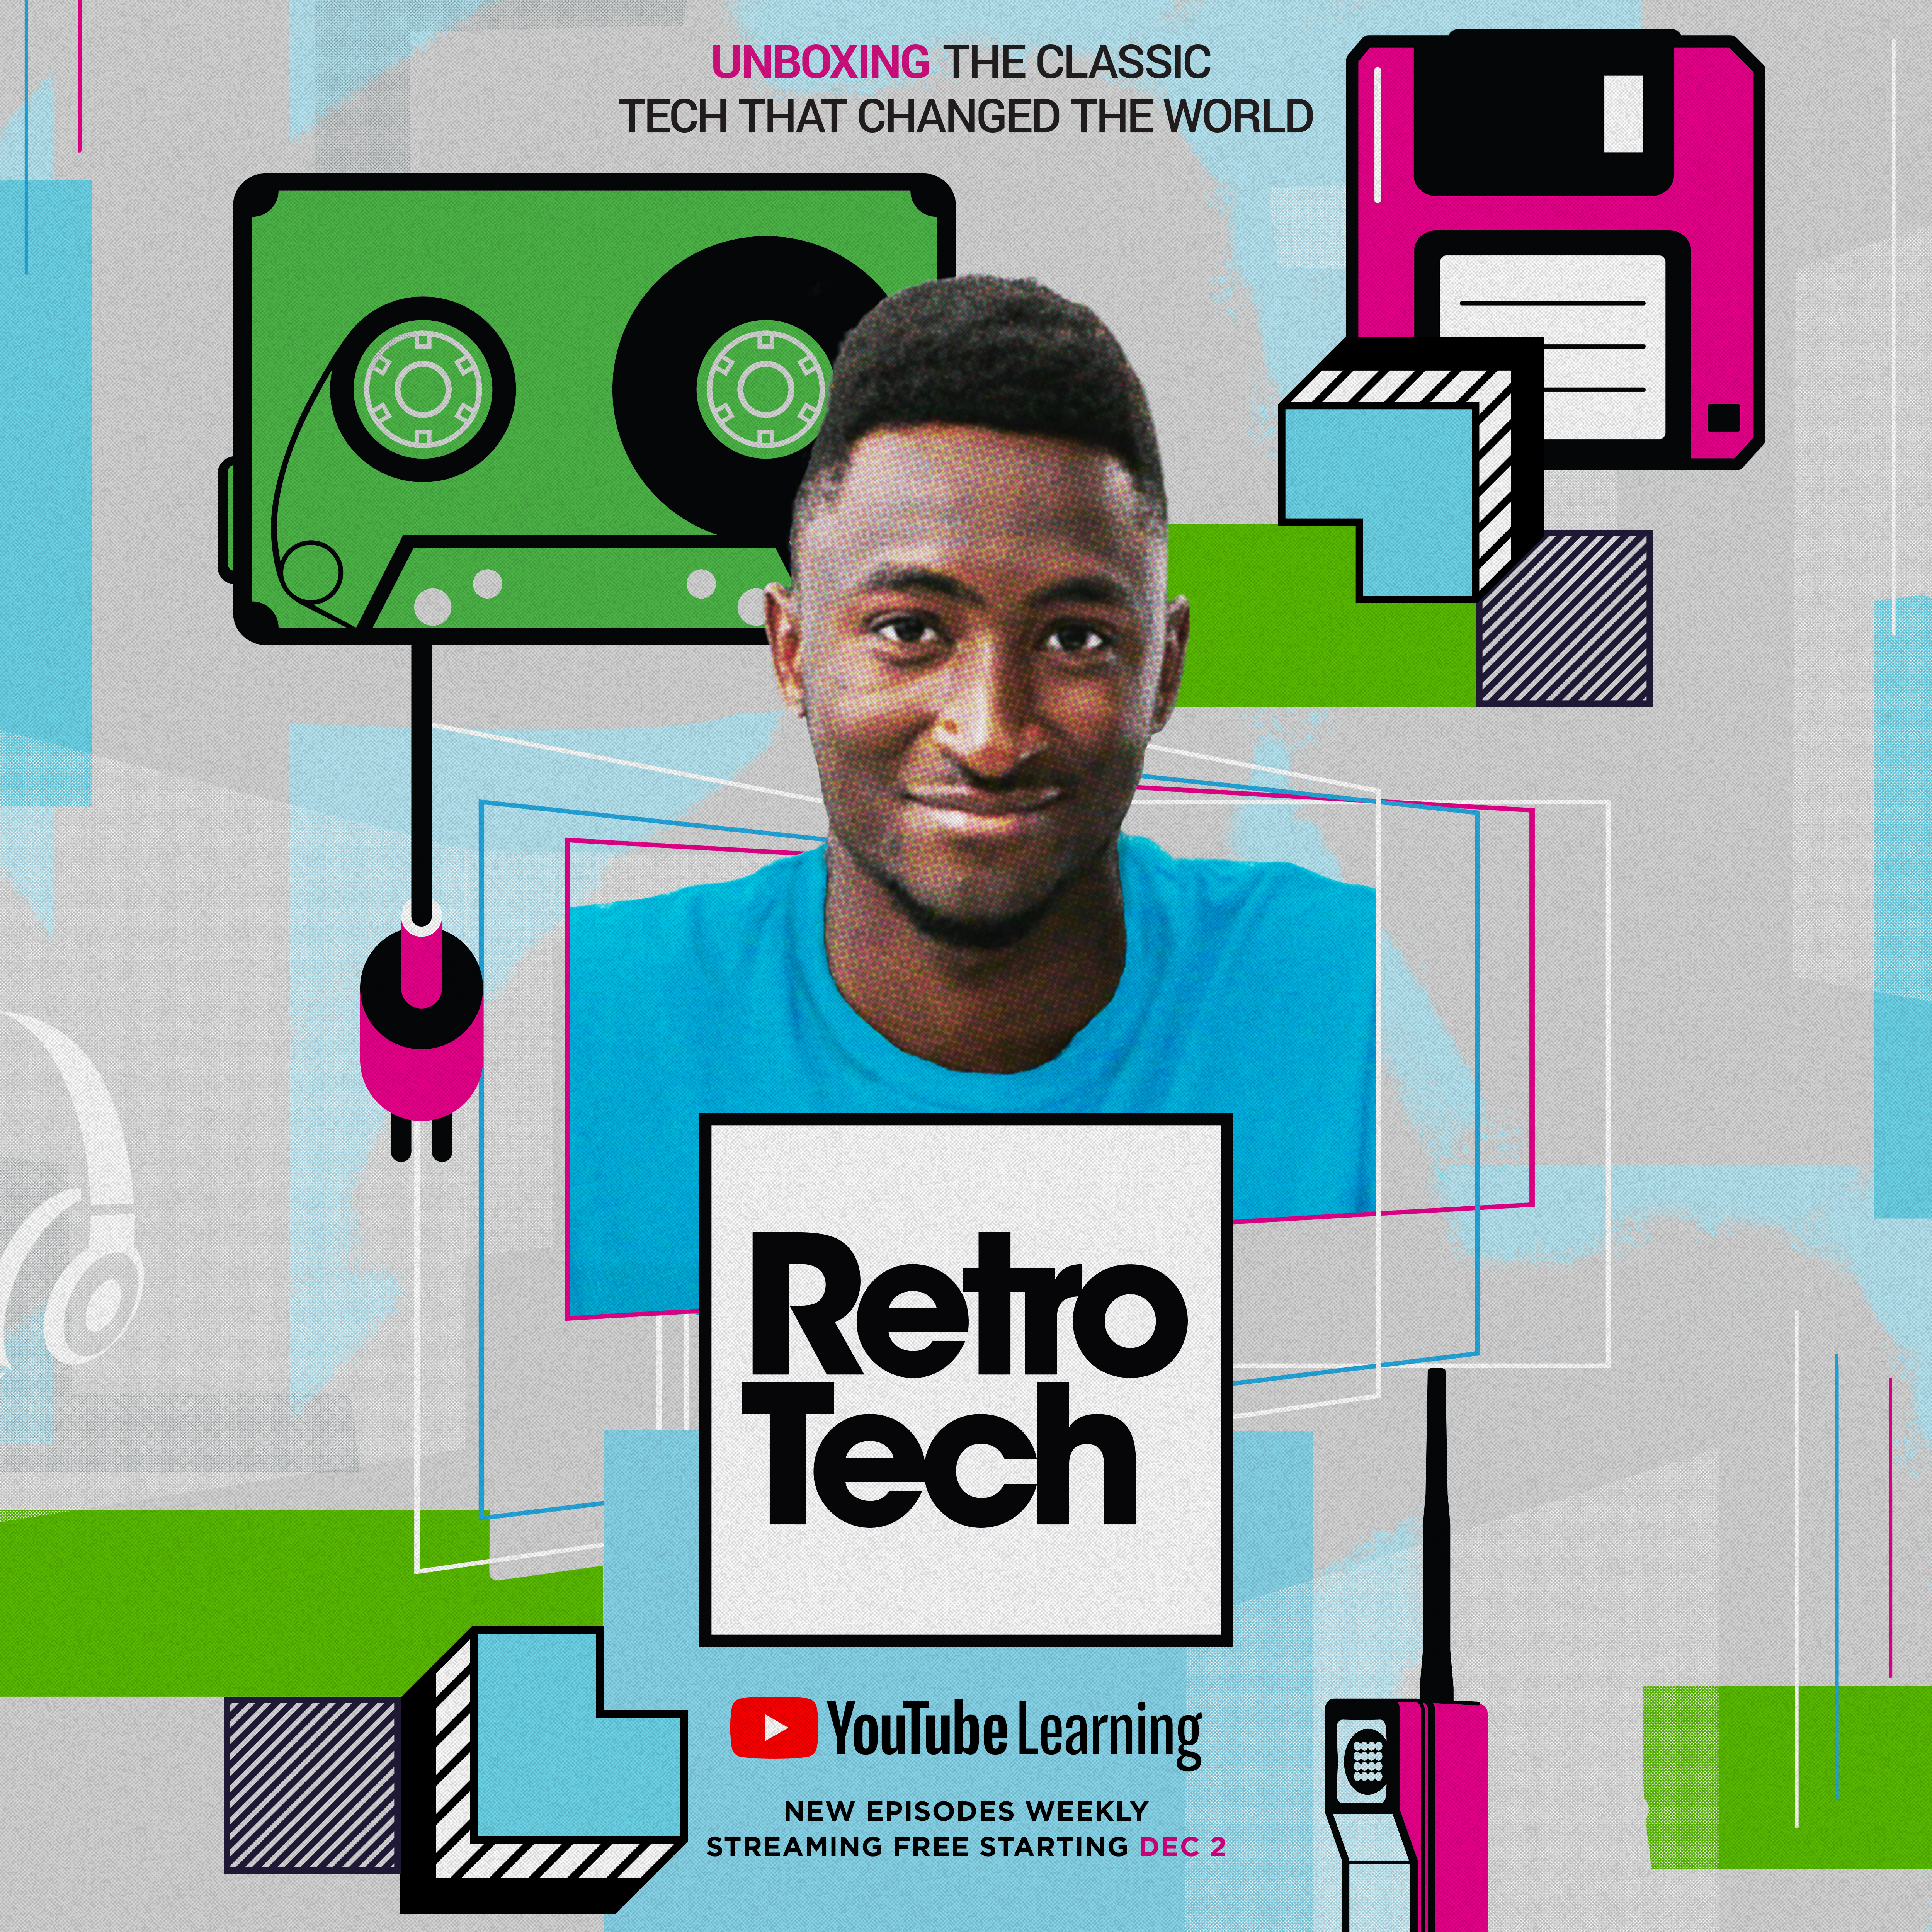 YouTube Drops First Trailer For New Learning Series Retro Tech